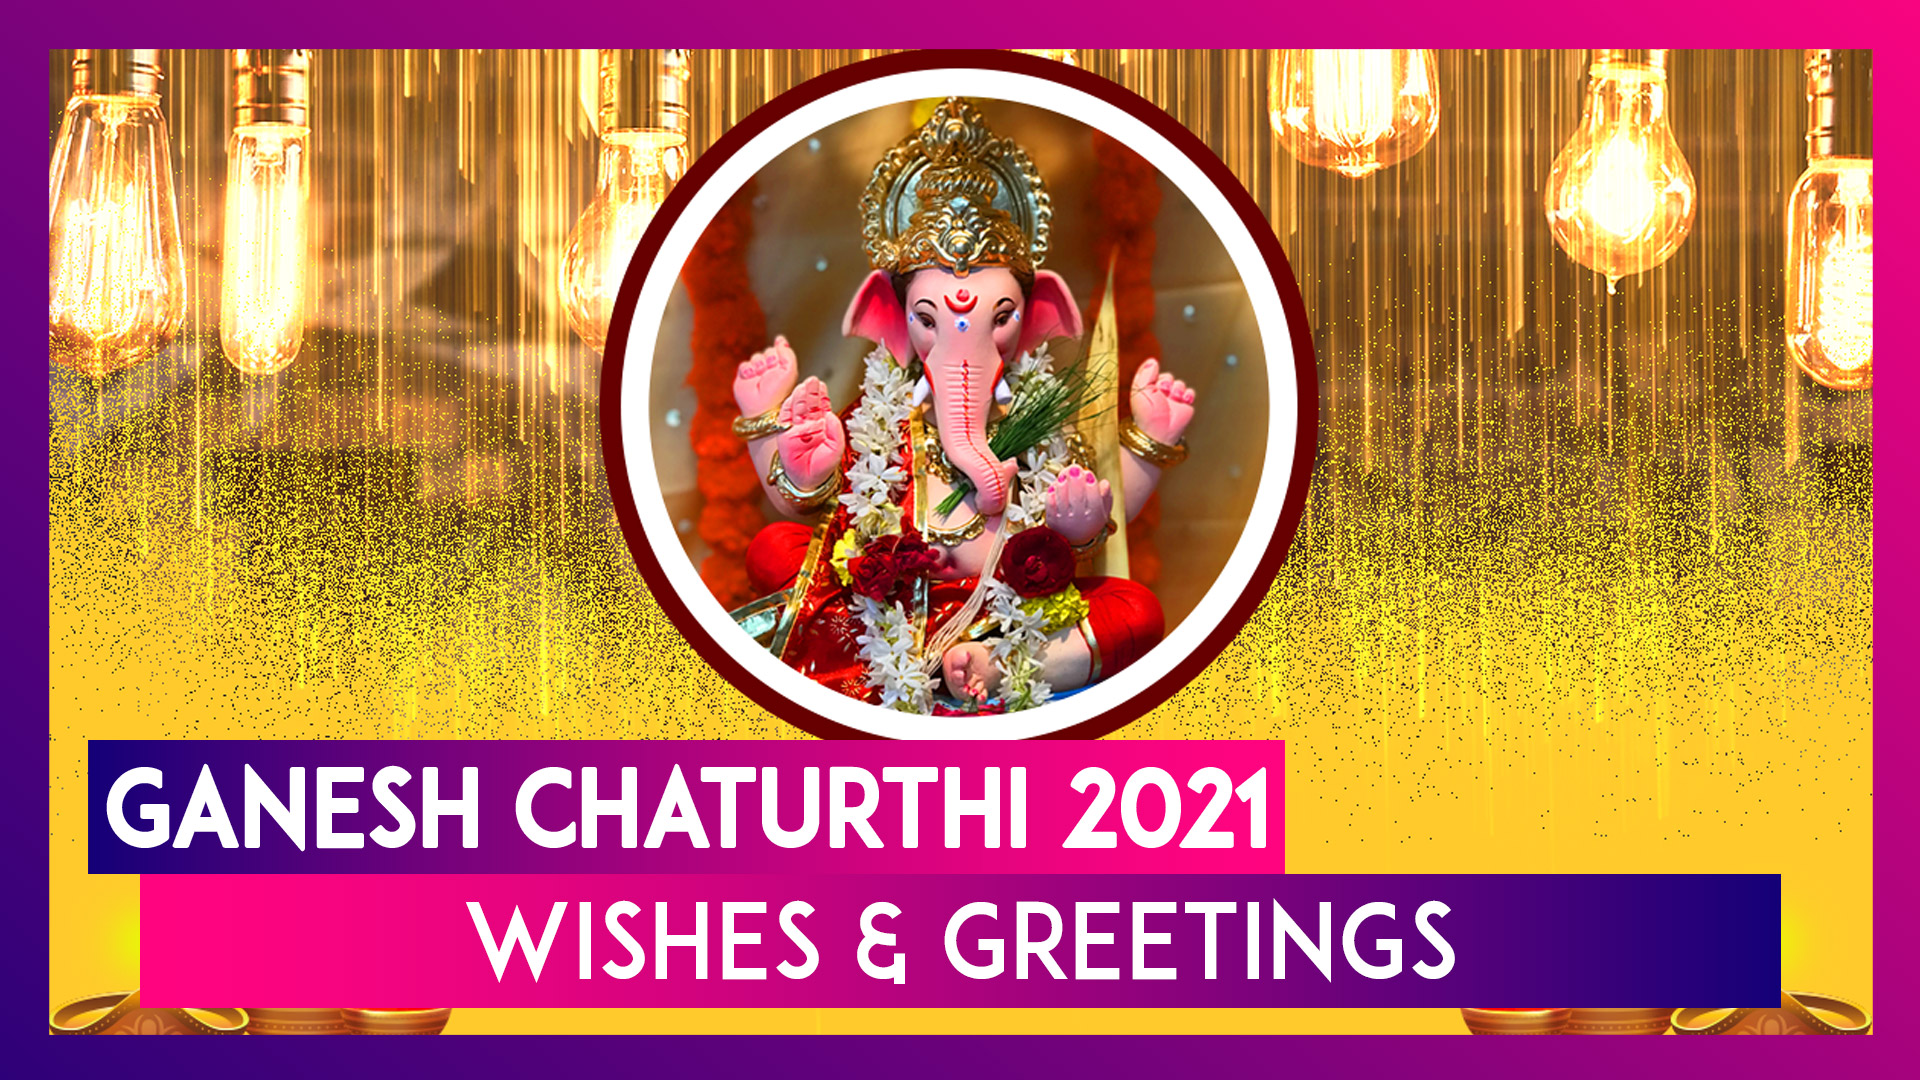 Xxx Bappa Morya - Ganesh Chaturthi 2021 Wishes & Greetings: WhatsApp Messages and Images To  Send During Ganeshotsav | ðŸ“¹ Watch Videos From LatestLY